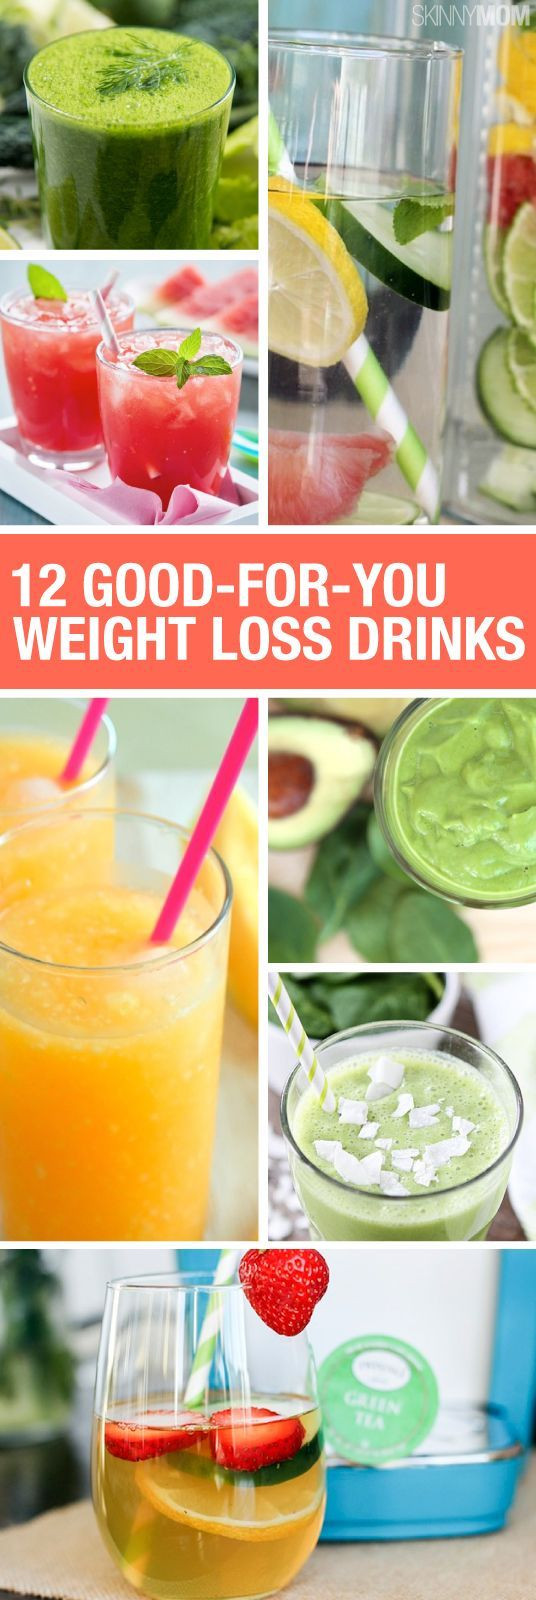 Drinking Smoothies Everyday For Weight Loss
 111 best Healthy Eats images on Pinterest